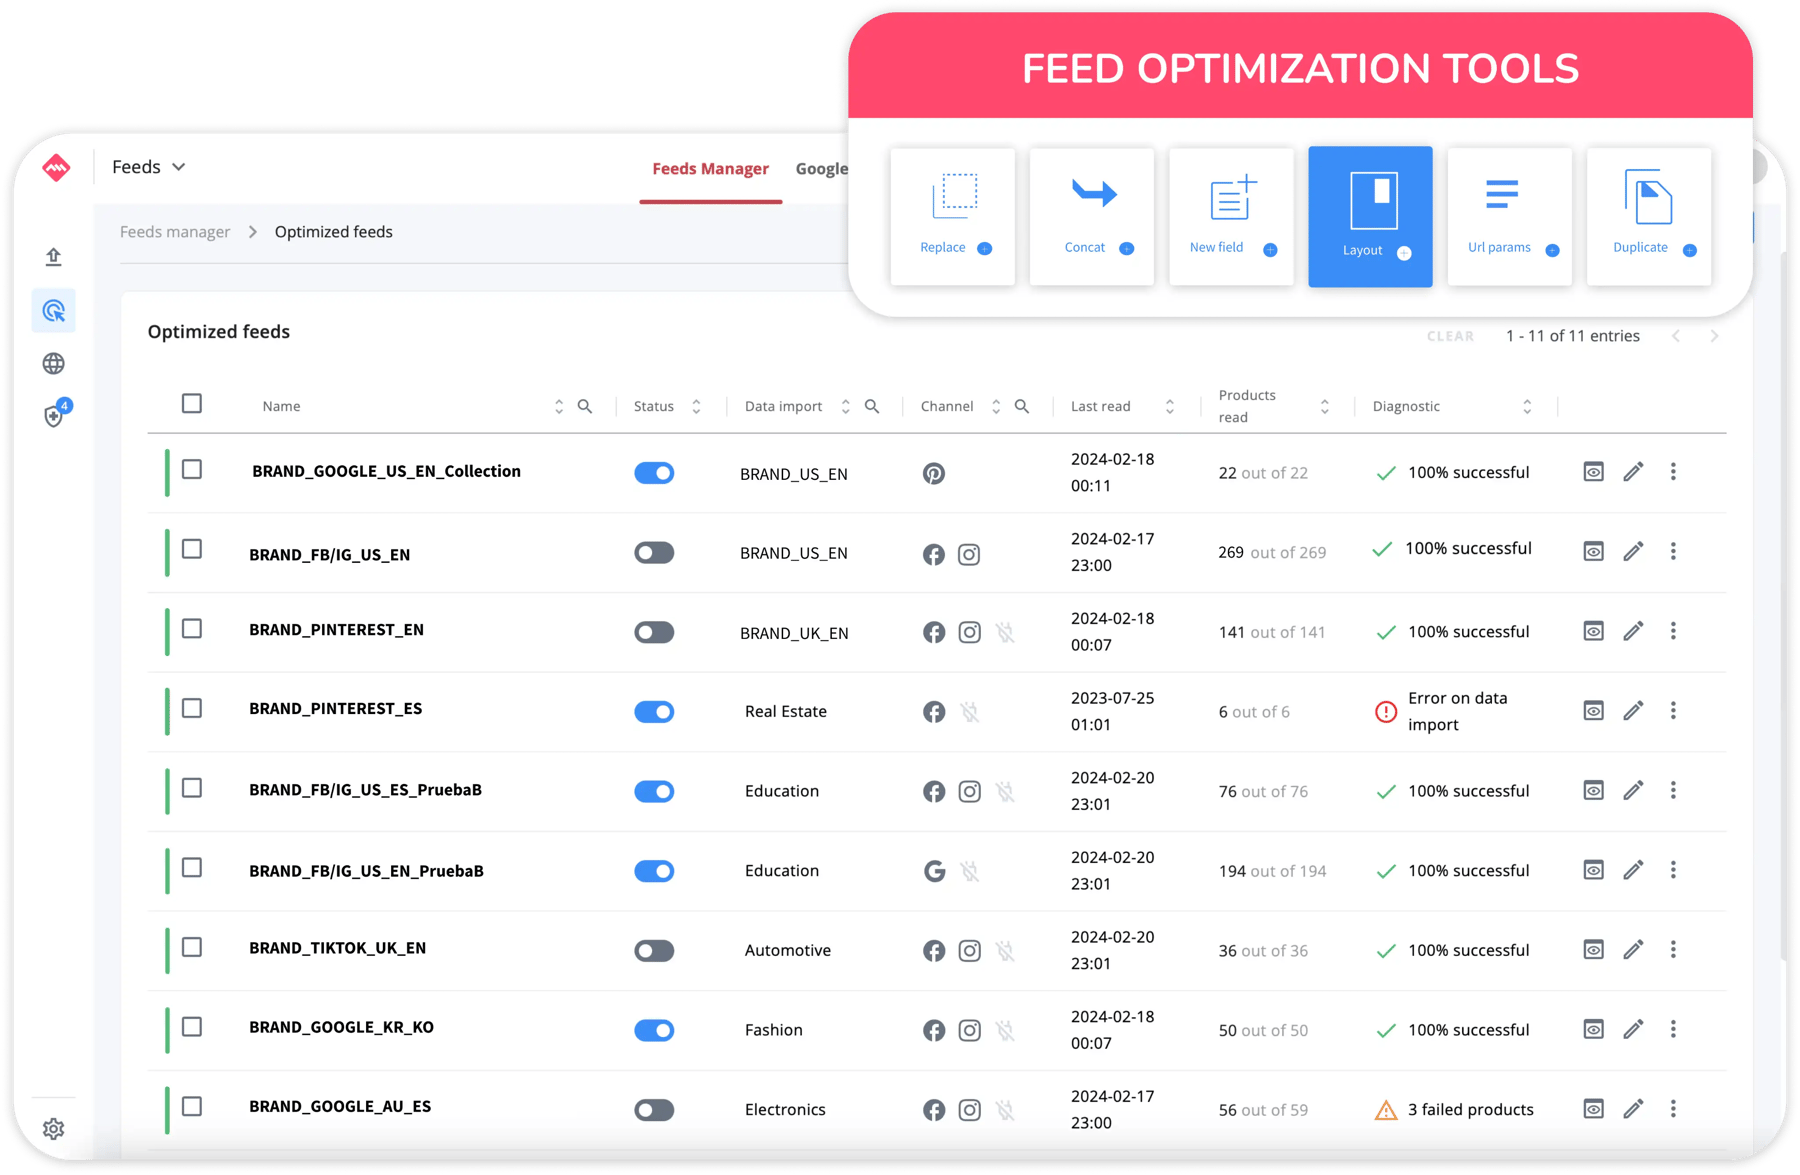 OPTIMIZE YOUR PRODUCT FEED INFORMATION